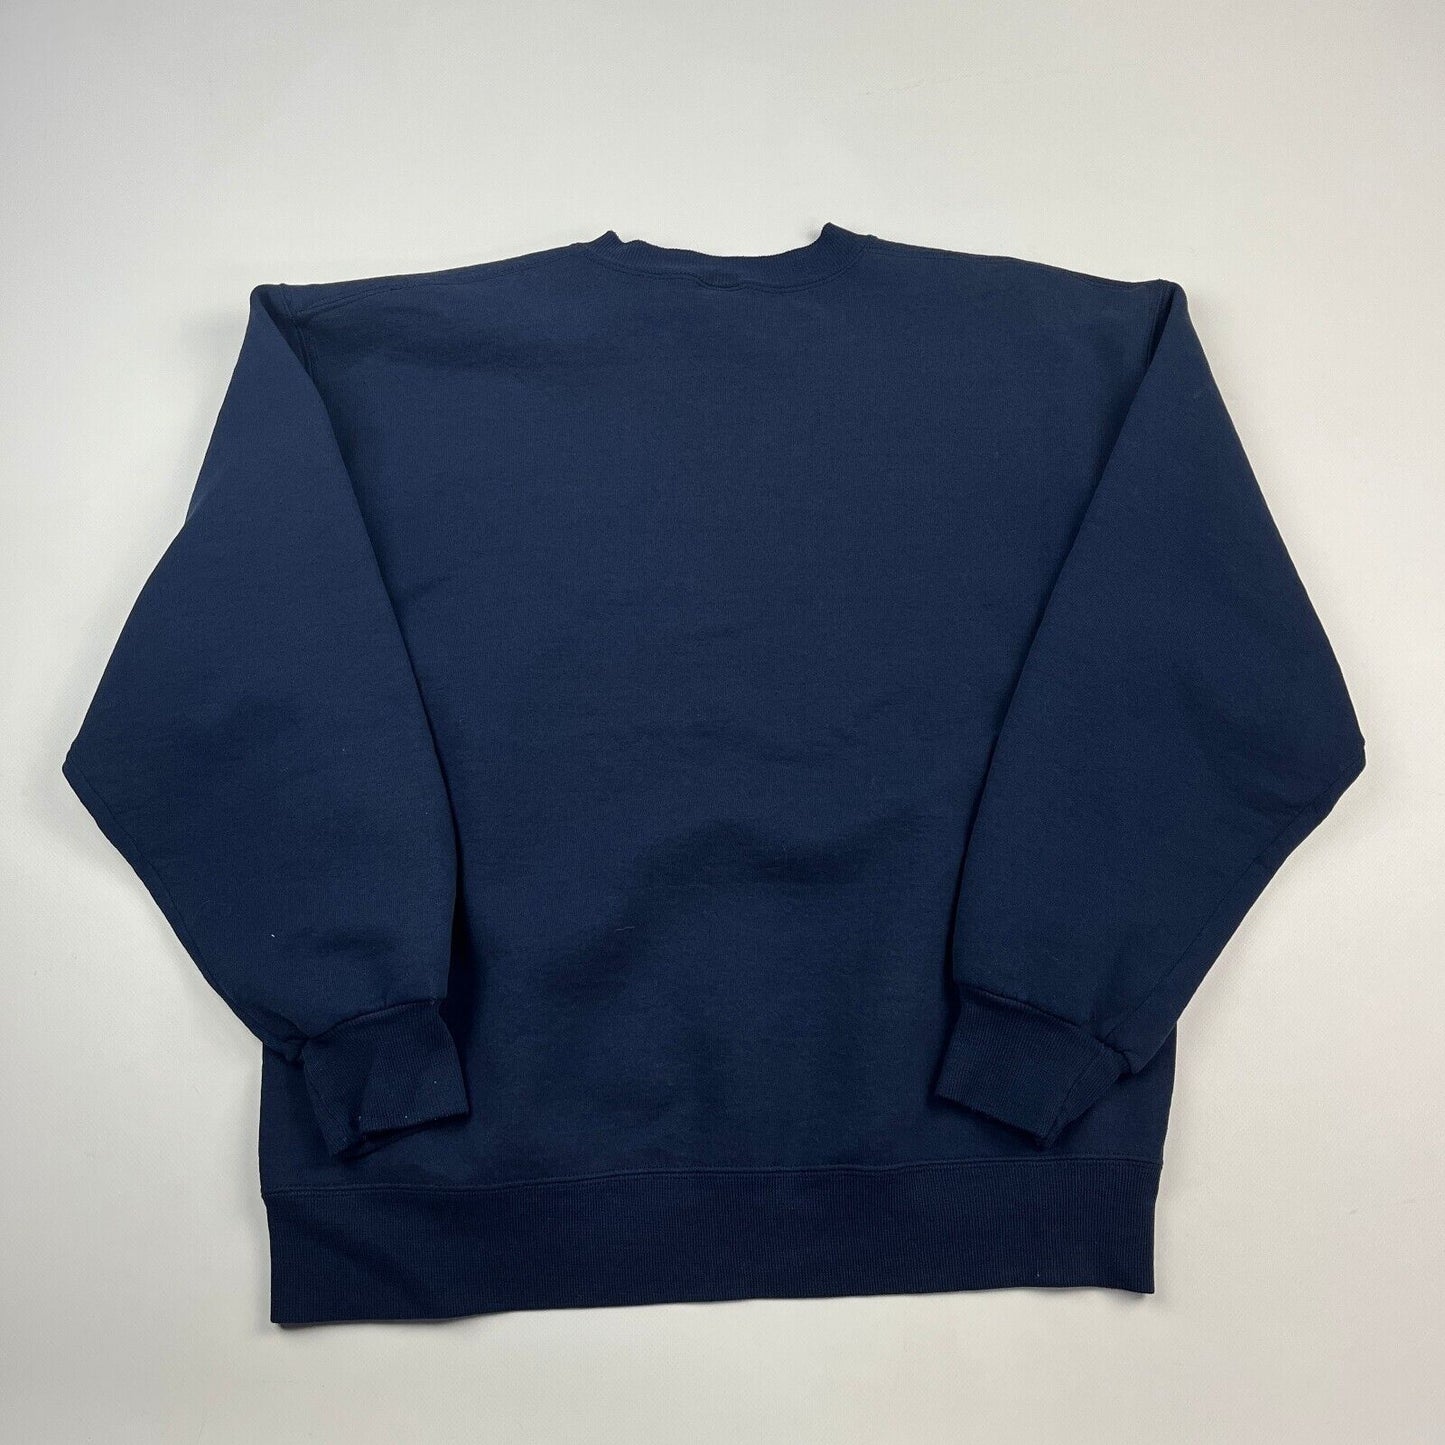 VINTAGE 90s Russell Athletic Blank Navy Crewneck Sweater sz Large Men